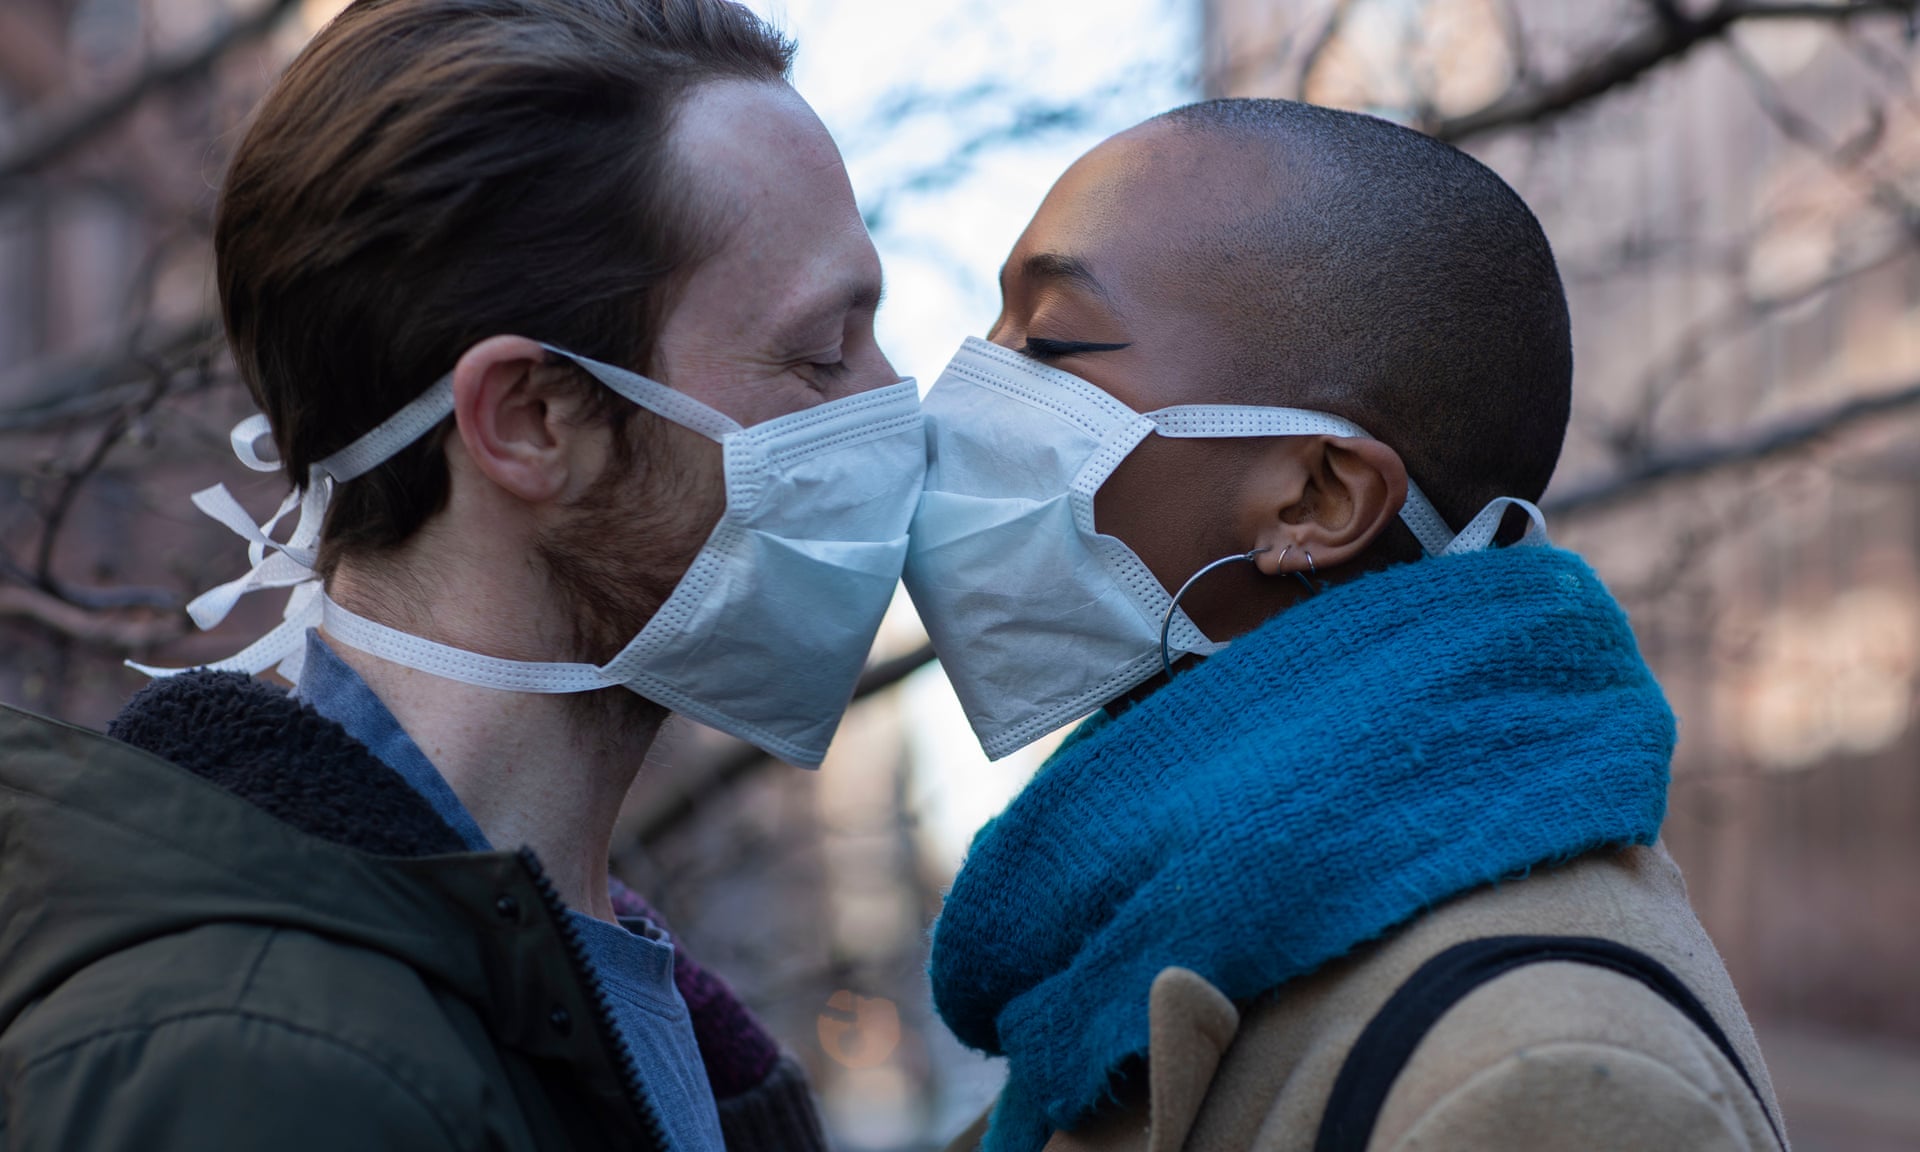 A man and a woman wearing medical masks over their noses and mouths kiss tenderly.